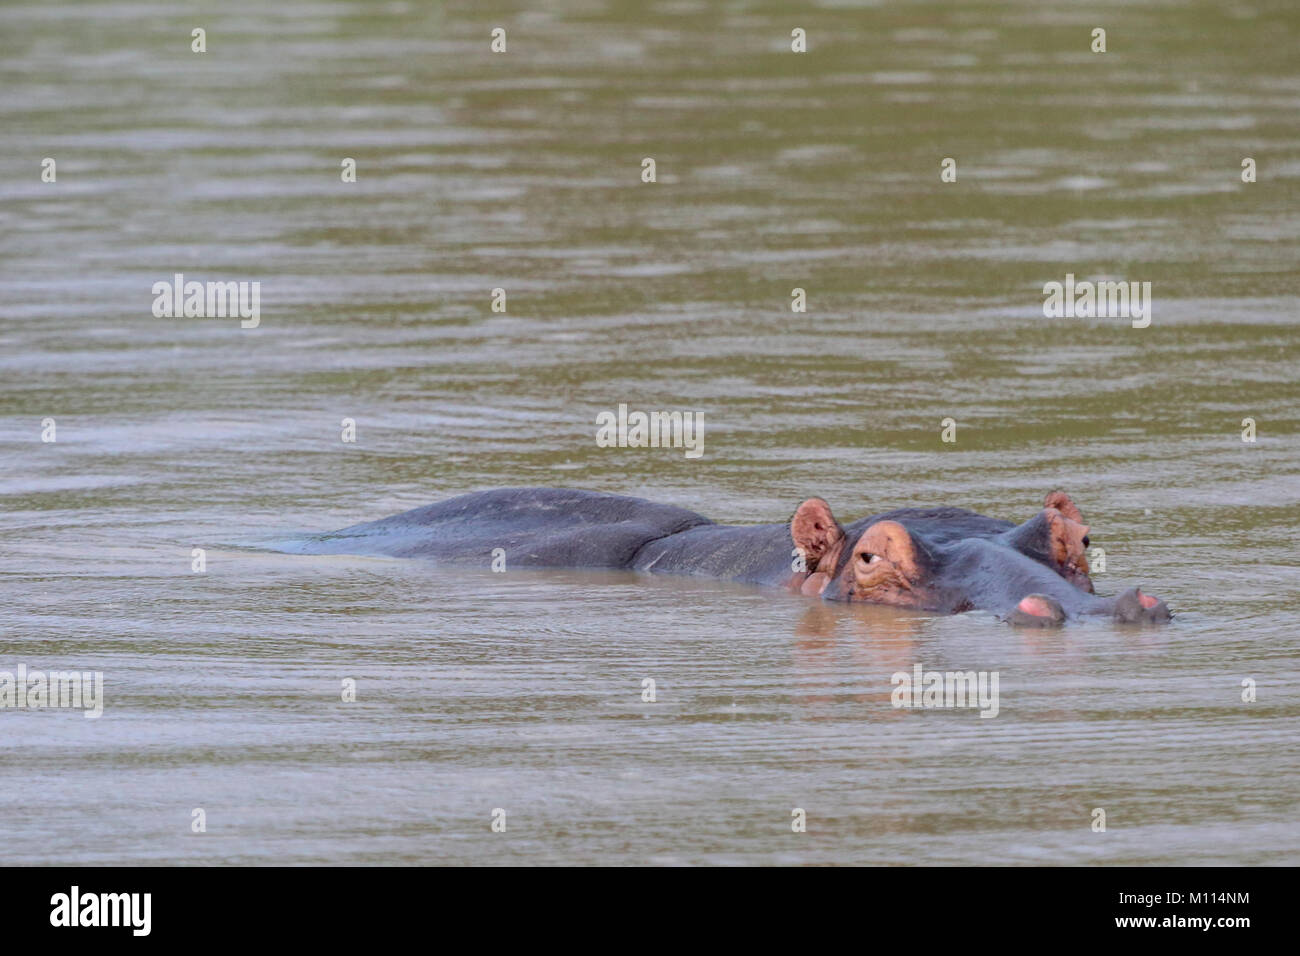 Hippo wallowing in lake in the rain. Head and body just above water. Stock Photo